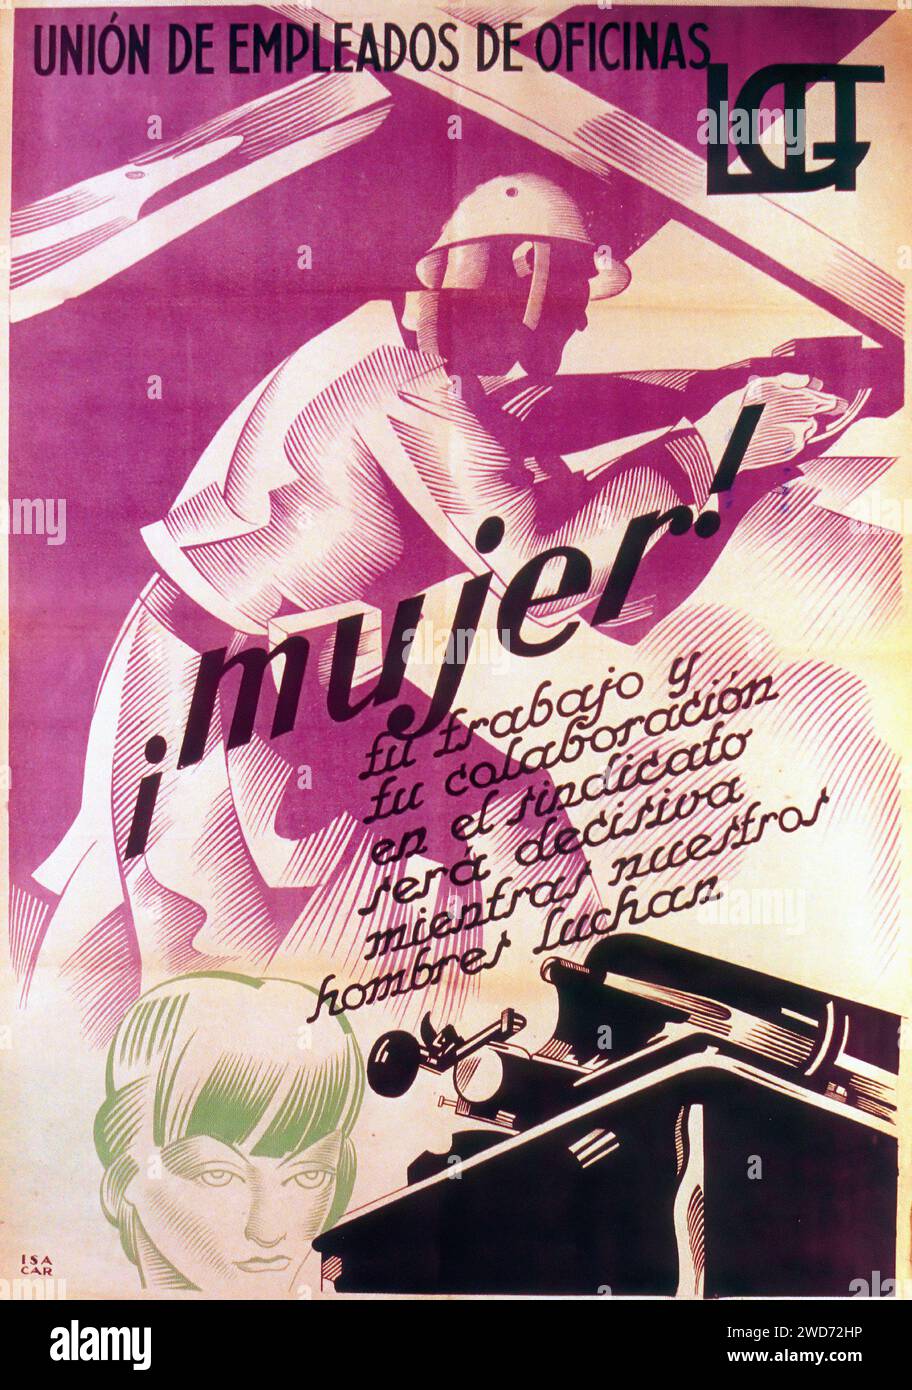 'Unión de Empleados de Oficinas. ¡Mujer!' 'Office Employees Union. Woman!' This image is a propaganda poster representing the involvement of women in the workplace and their contribution to the union movement. It features a stylized female face and a typewriter, with abstract shapes in the background suggesting industrial elements. The design is modernist, using flat planes of color and angular lines to convey a sense of progress and modernity. It speaks to the empowerment of women and their role in the labor force  - Spanish Civil War (Guerra Civil Española) Propaganda Poster Stock Photo